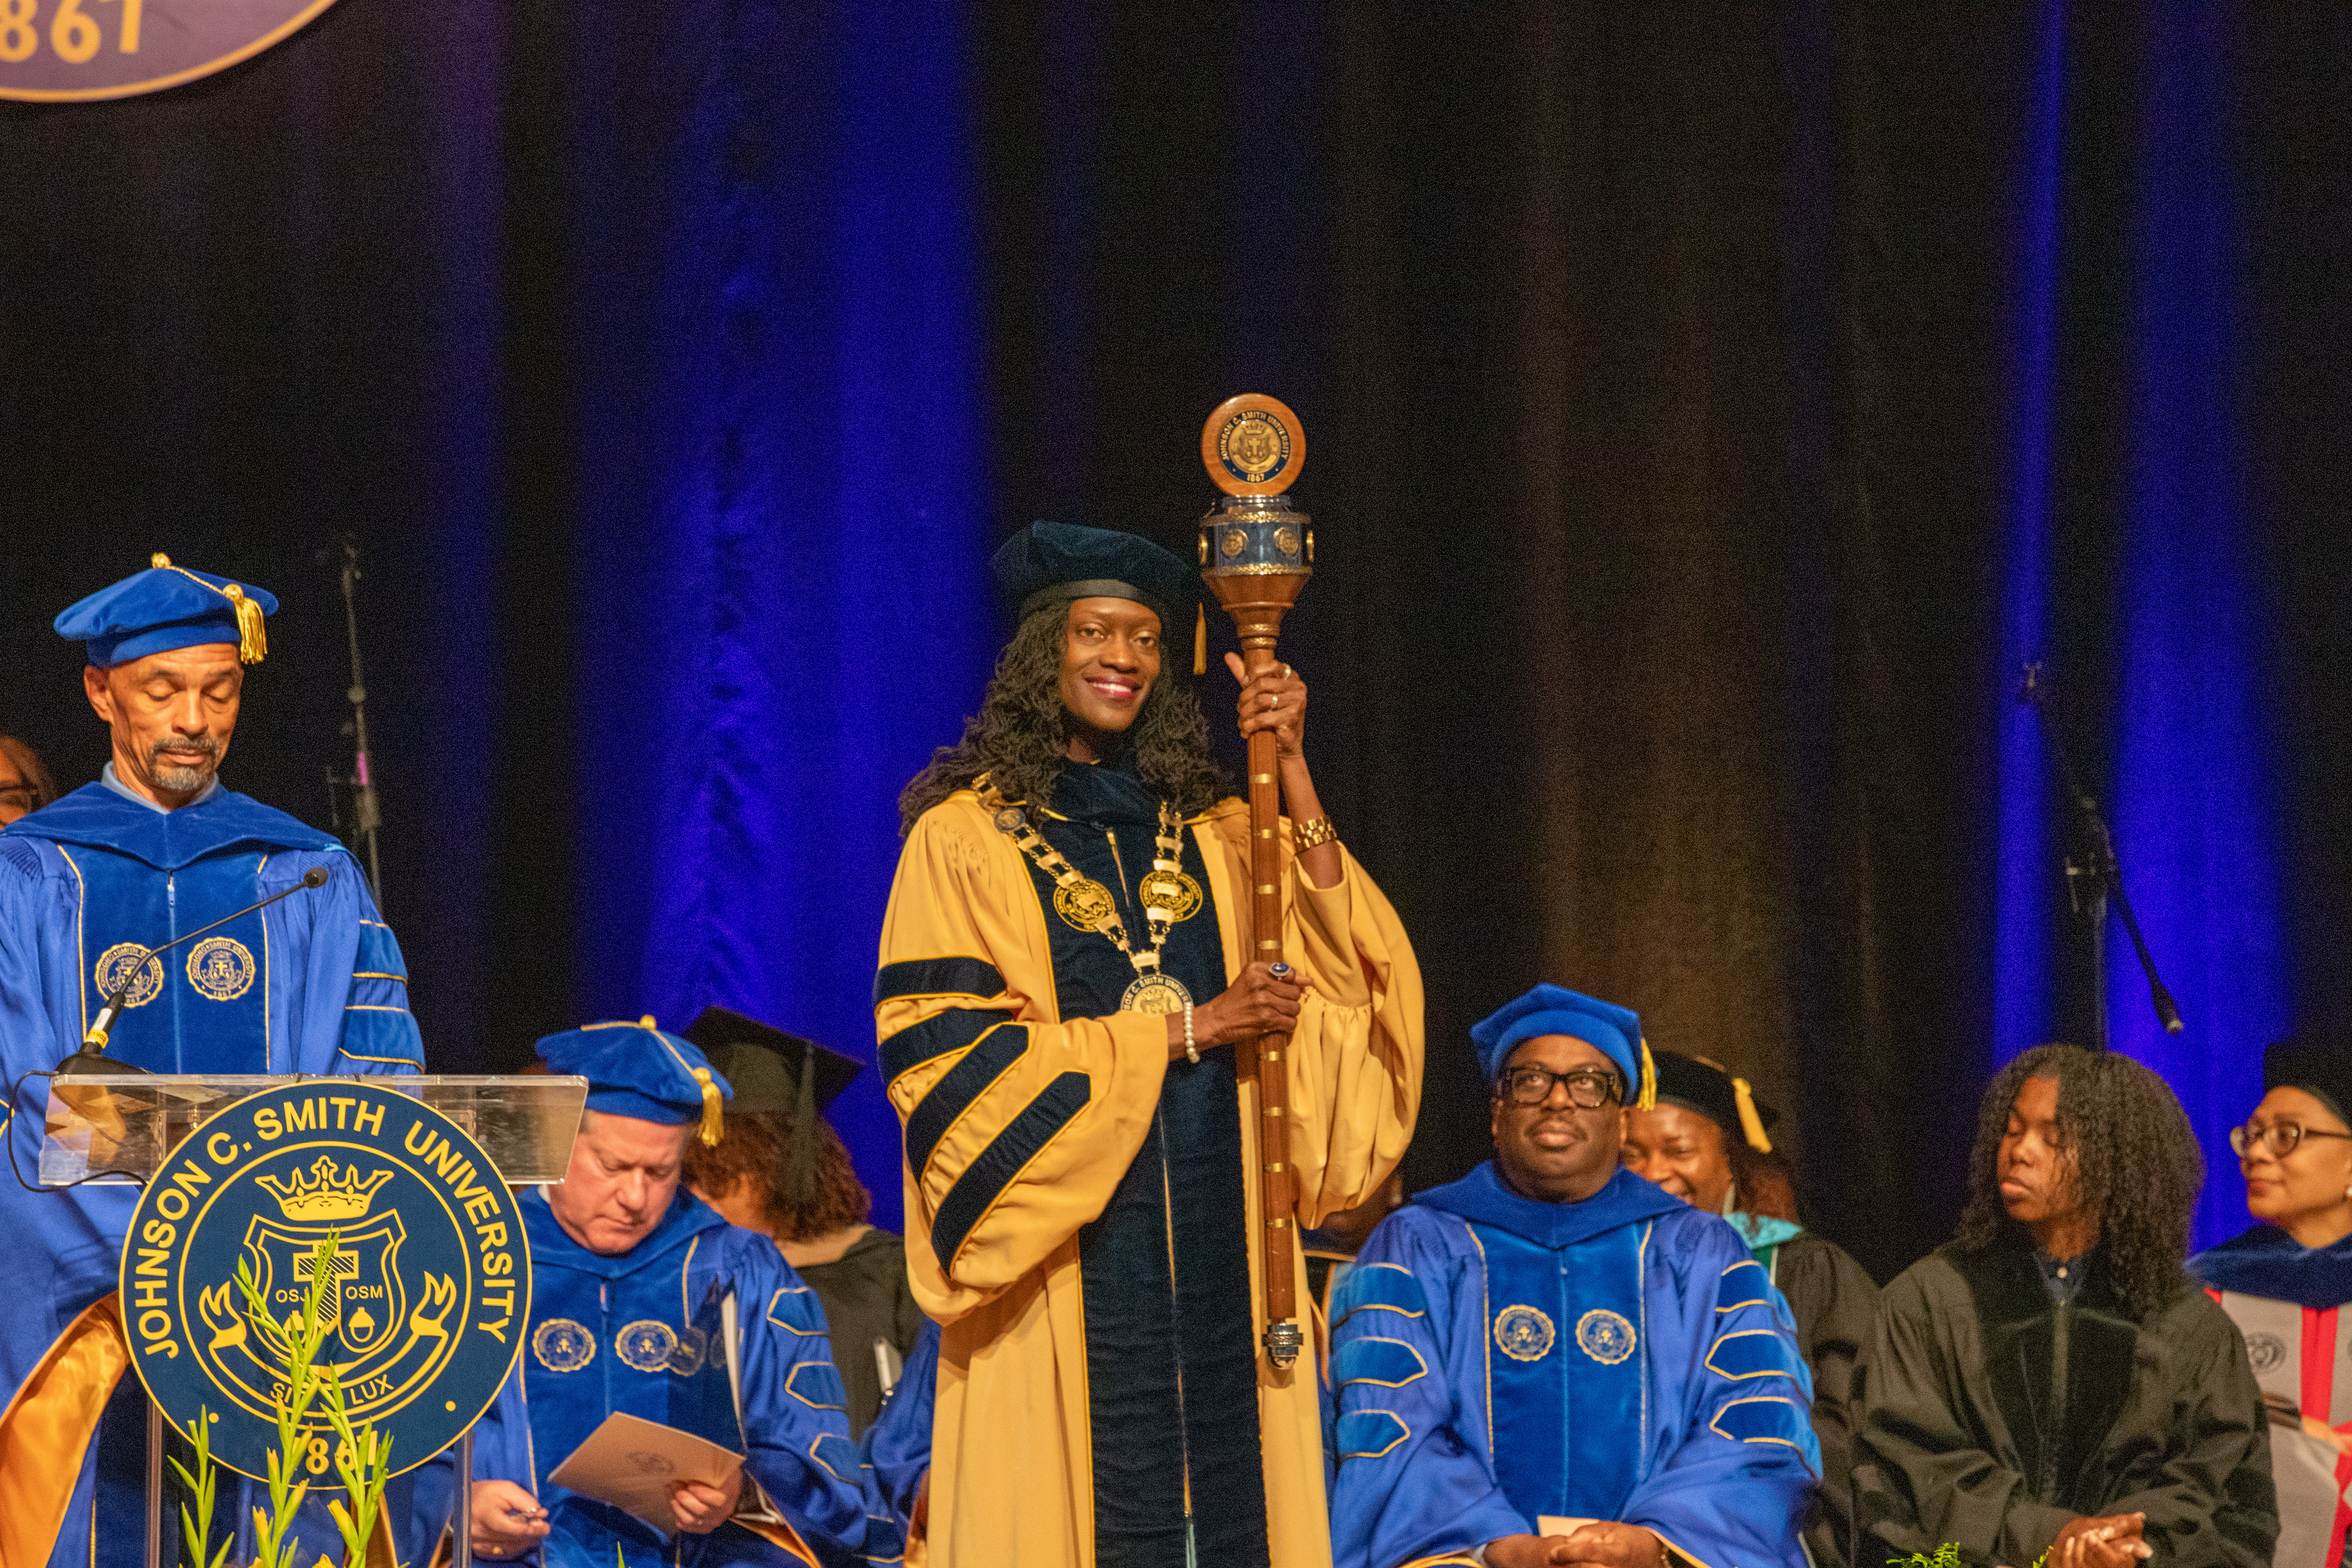 President Kinloch holding the mace during her inauguration